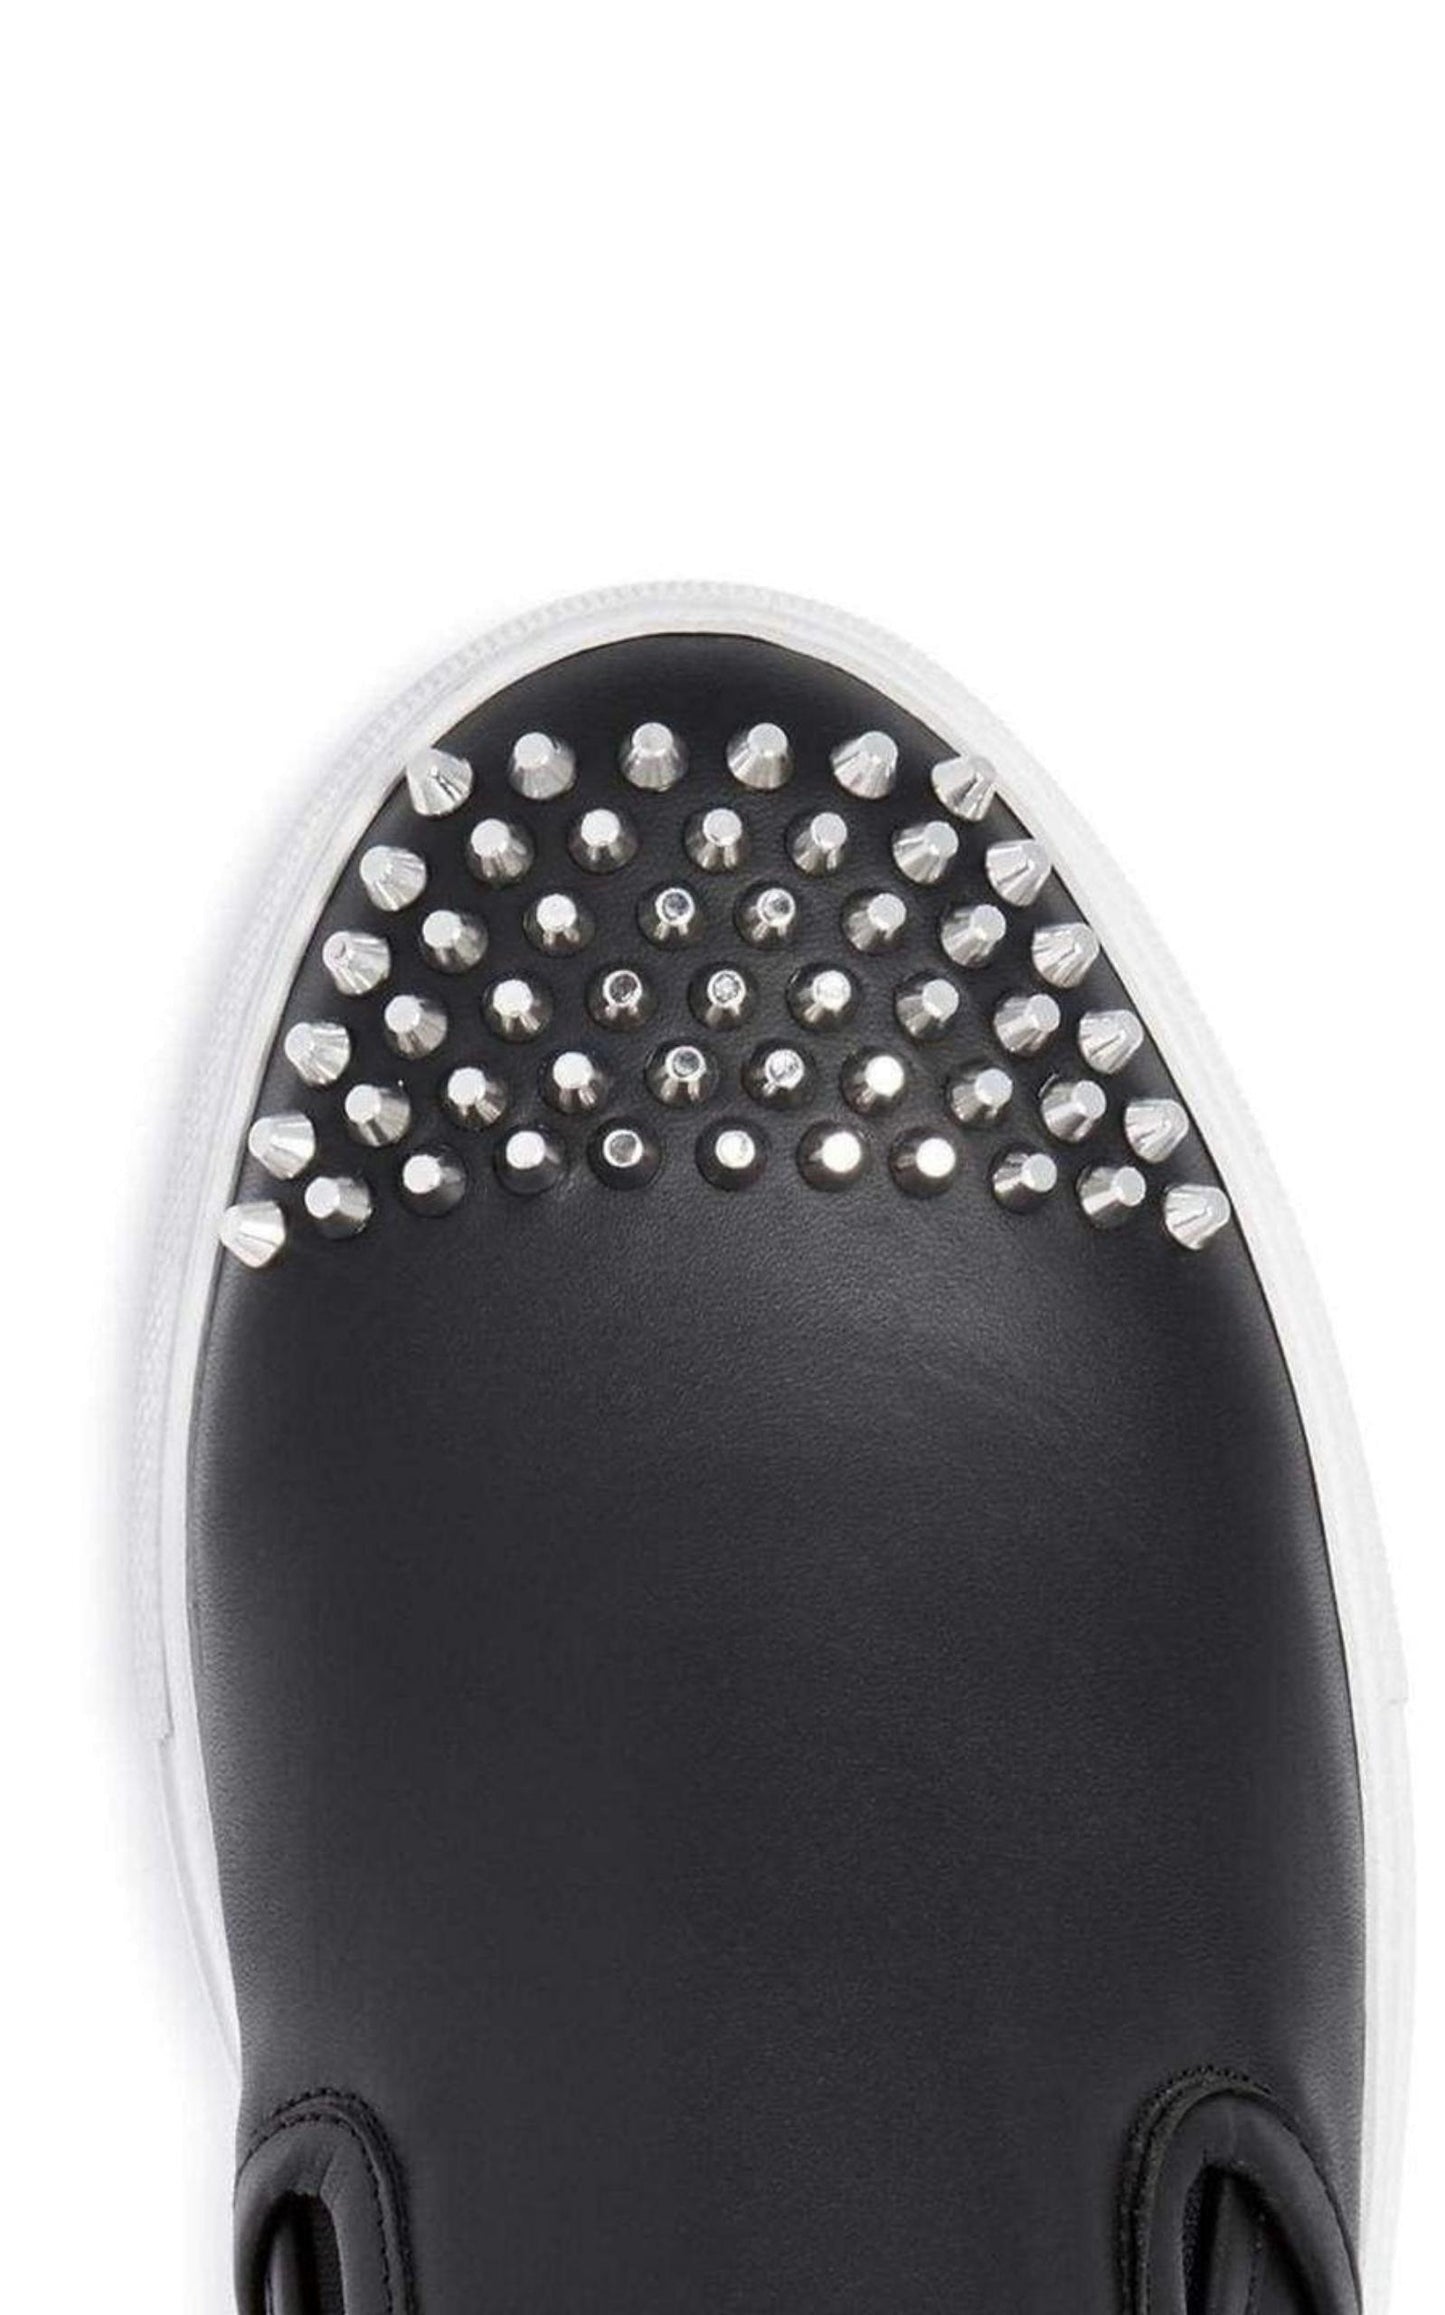  McQ - Alexander McQueenChris Studded Leather Slip-On Sneakers - Runway Catalog